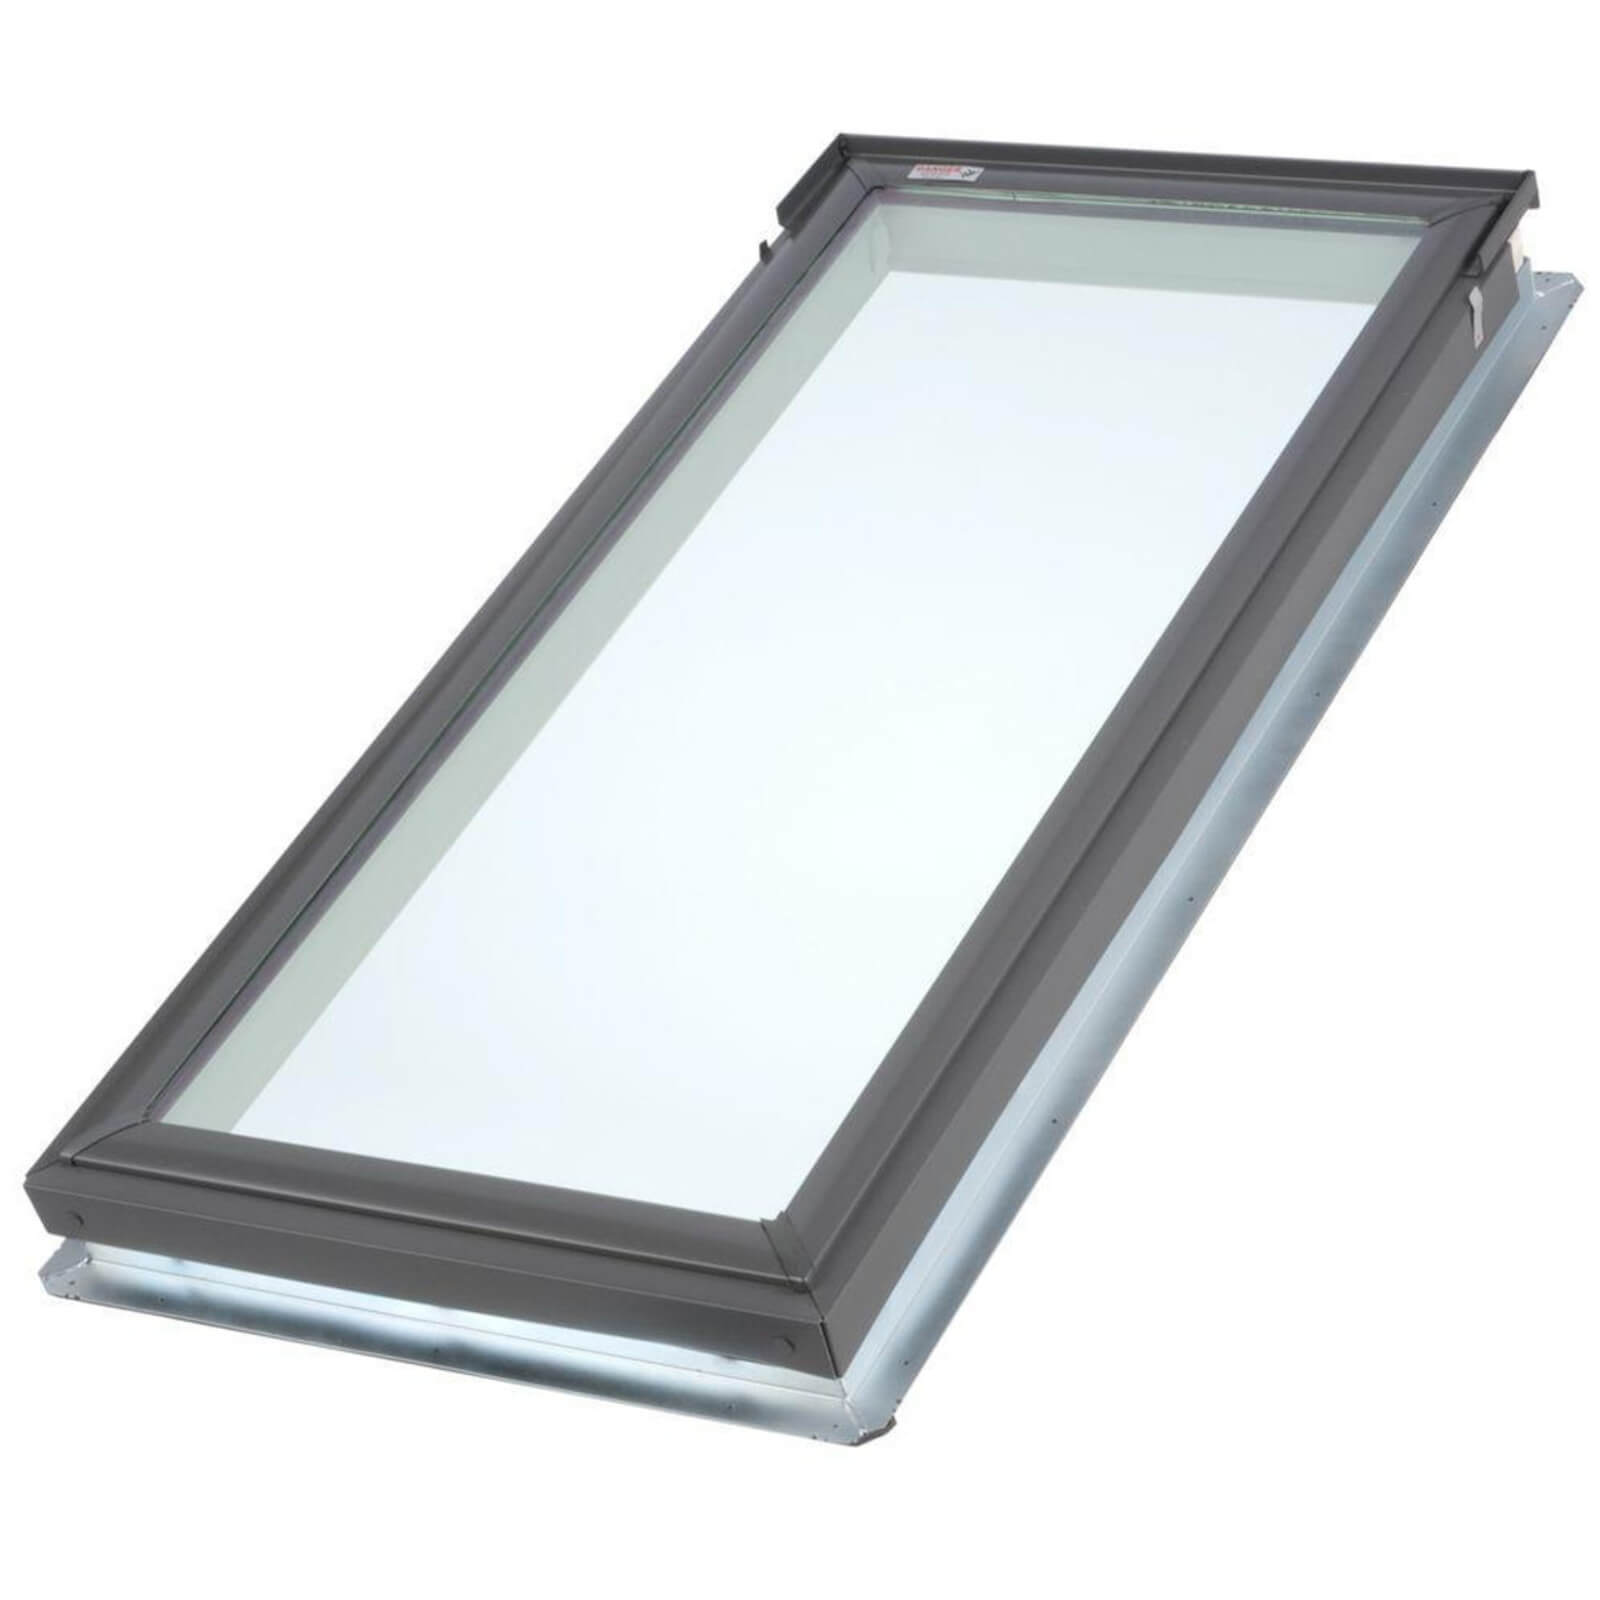 Velux FS Deck Mount Fixed Skylight (In Stock Now)